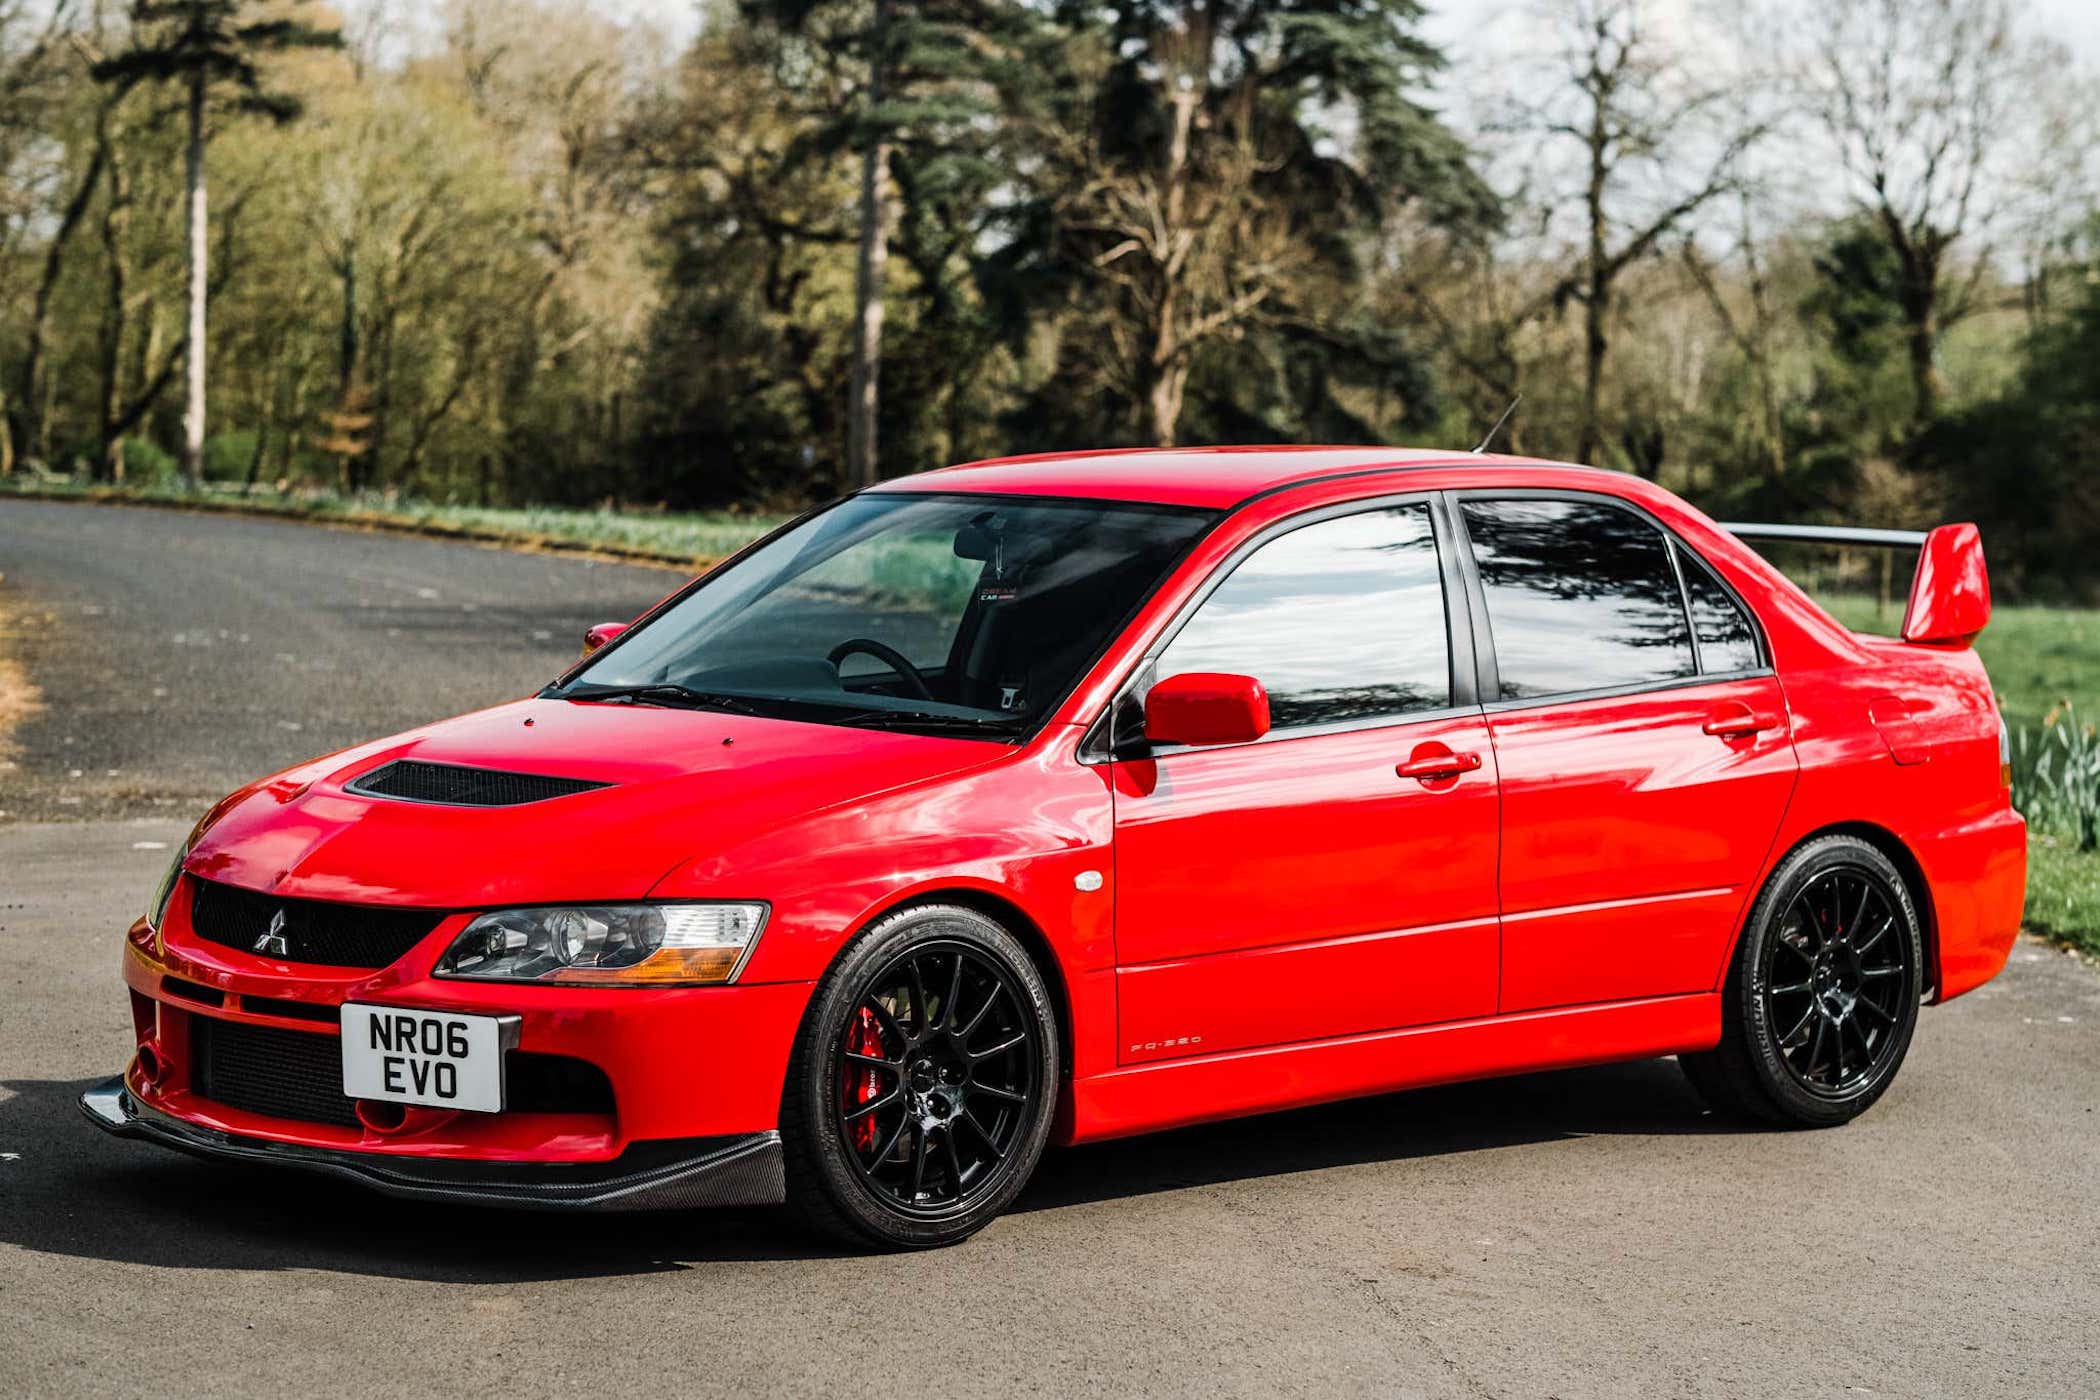 Man Wins 06 Mitsubishi Lancer Evo 9 Dream Car Giveaways And Destroys It In 24 Hours